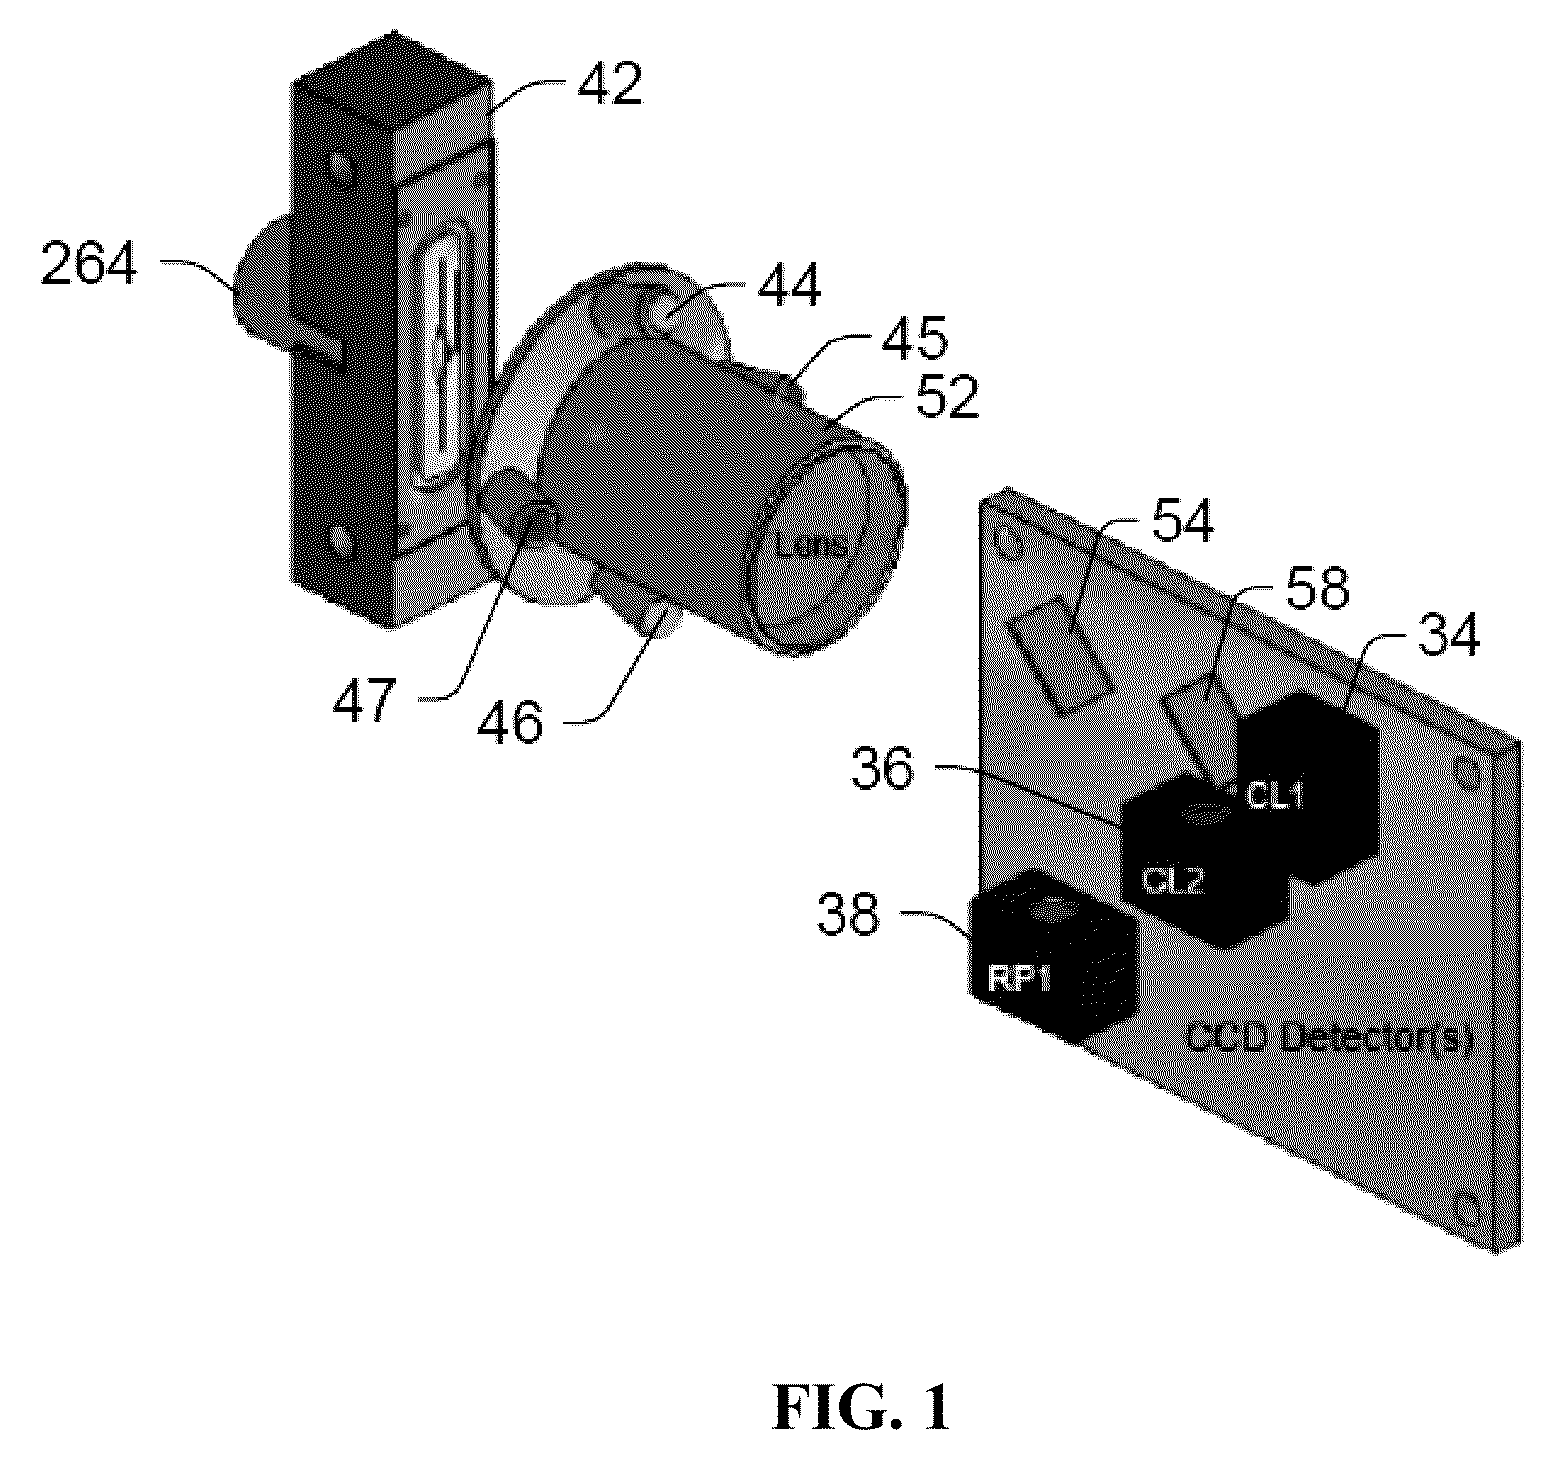 Systems and methods for multiplex analysis of PCR in real time